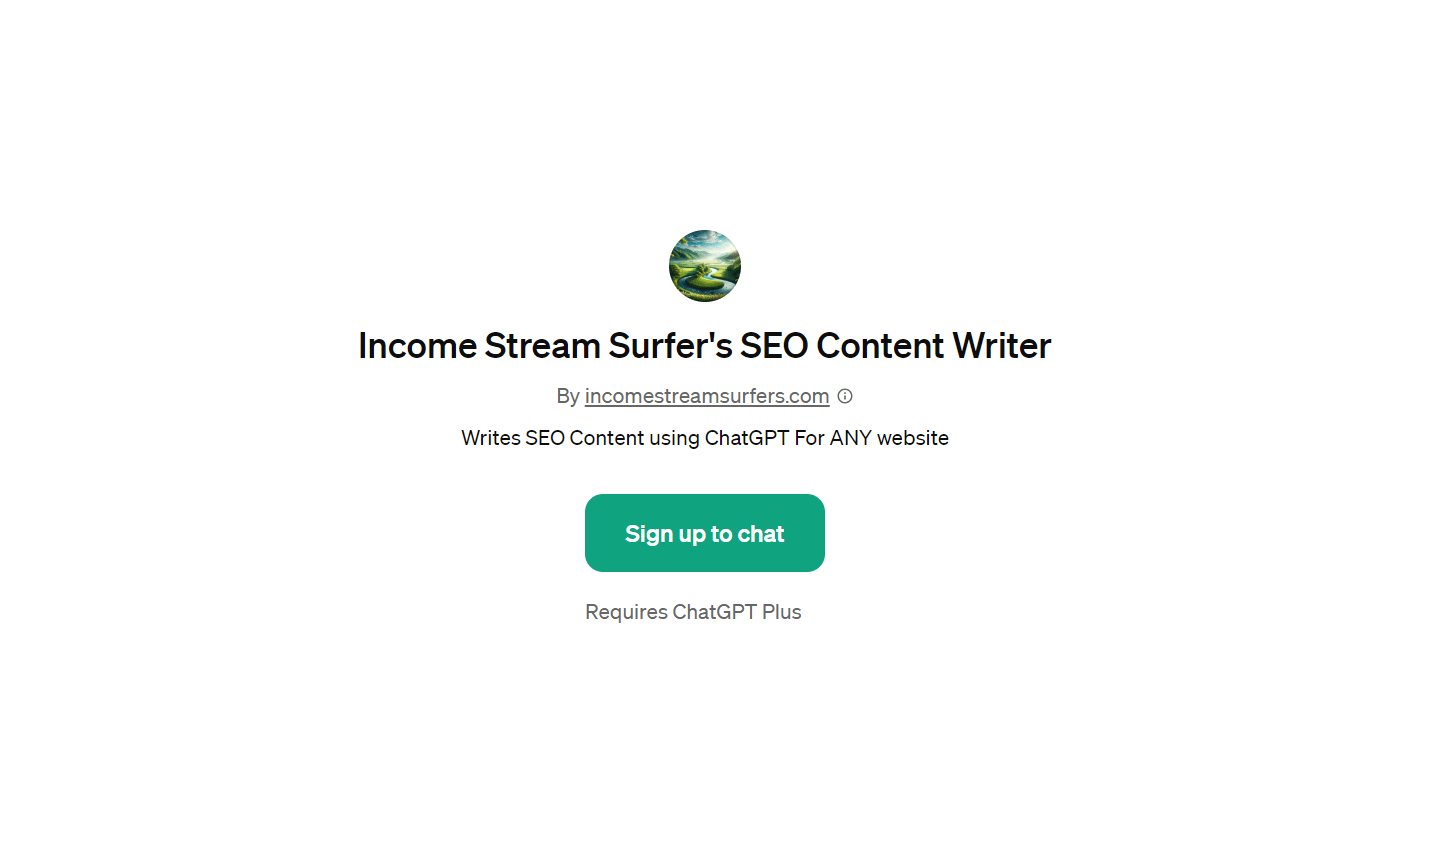 Income Stream Surfer’s SEO Content Writer - for Automatically Optimized Content